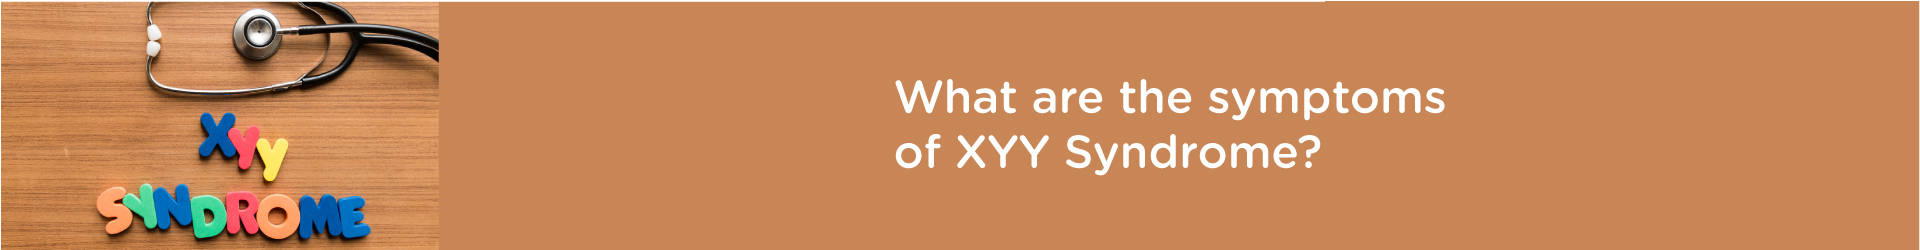 What are the Symptoms of XYY Syndrome?